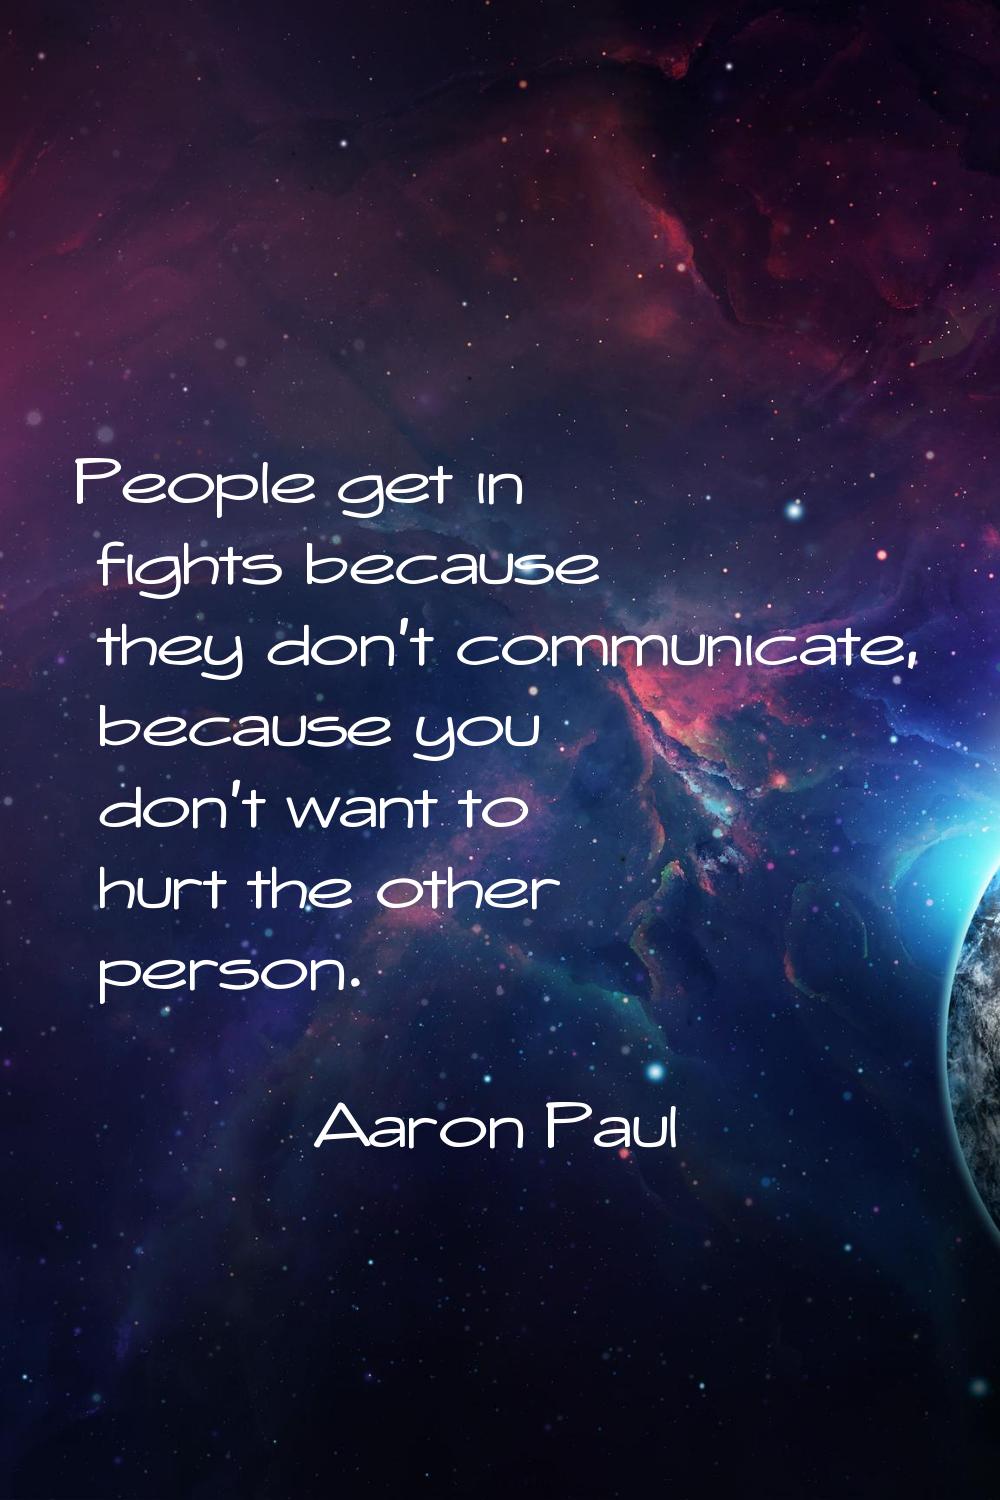 People get in fights because they don't communicate, because you don't want to hurt the other perso